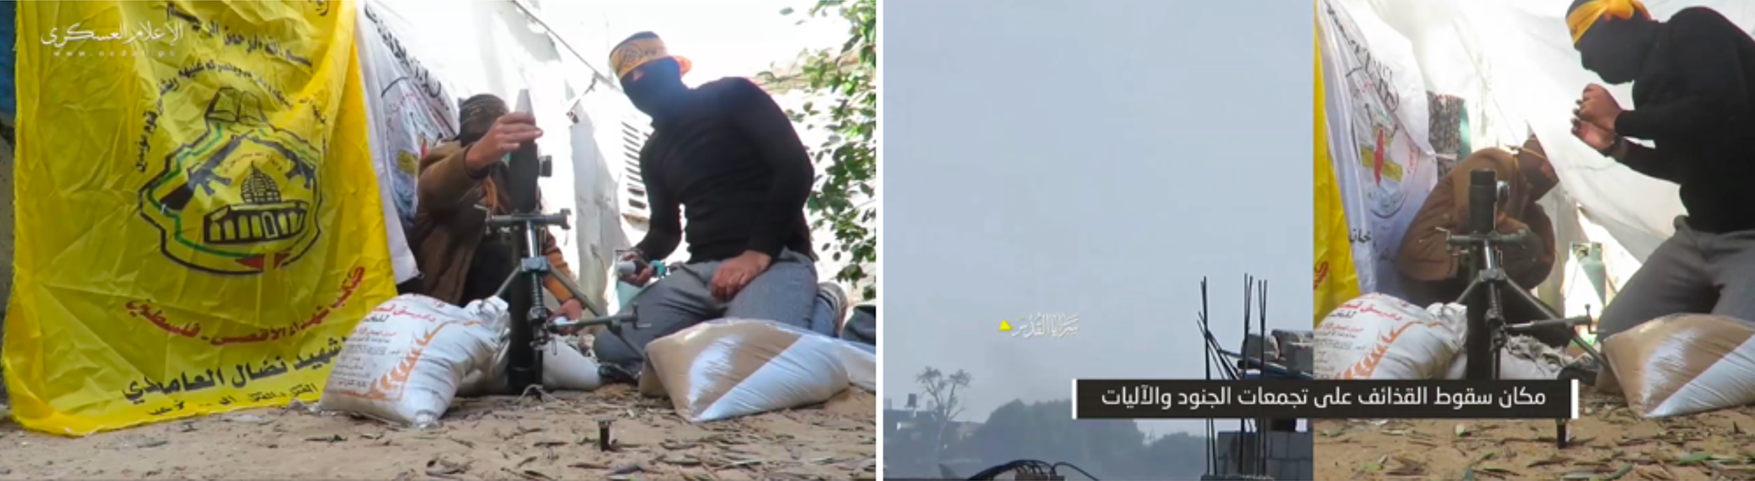 AAMB-Fatah-produced video (left) with website watermark and AQB-produced video (right) with a yellow triangle, both of which show the same fighters cooperatively firing mortars. (Source: Telegram)